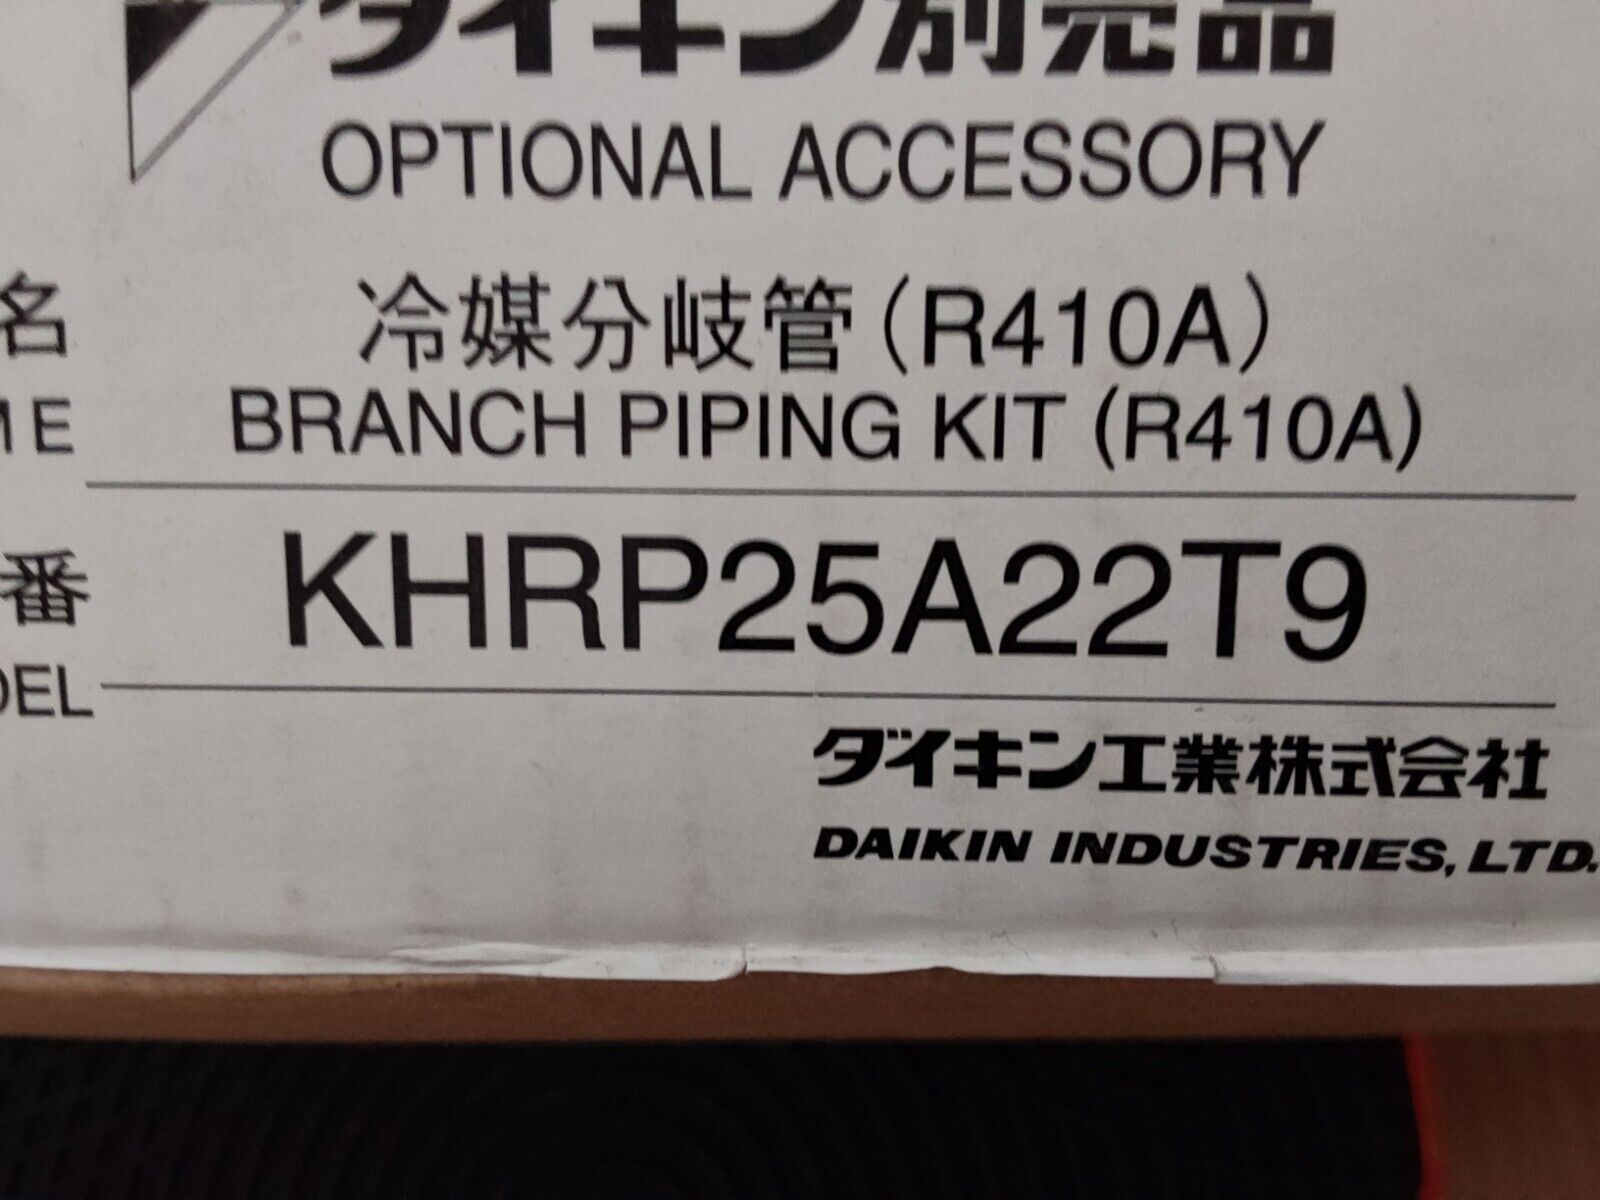 Diakin Branch Piping Kit KHRP25A22T9 3pipe joint